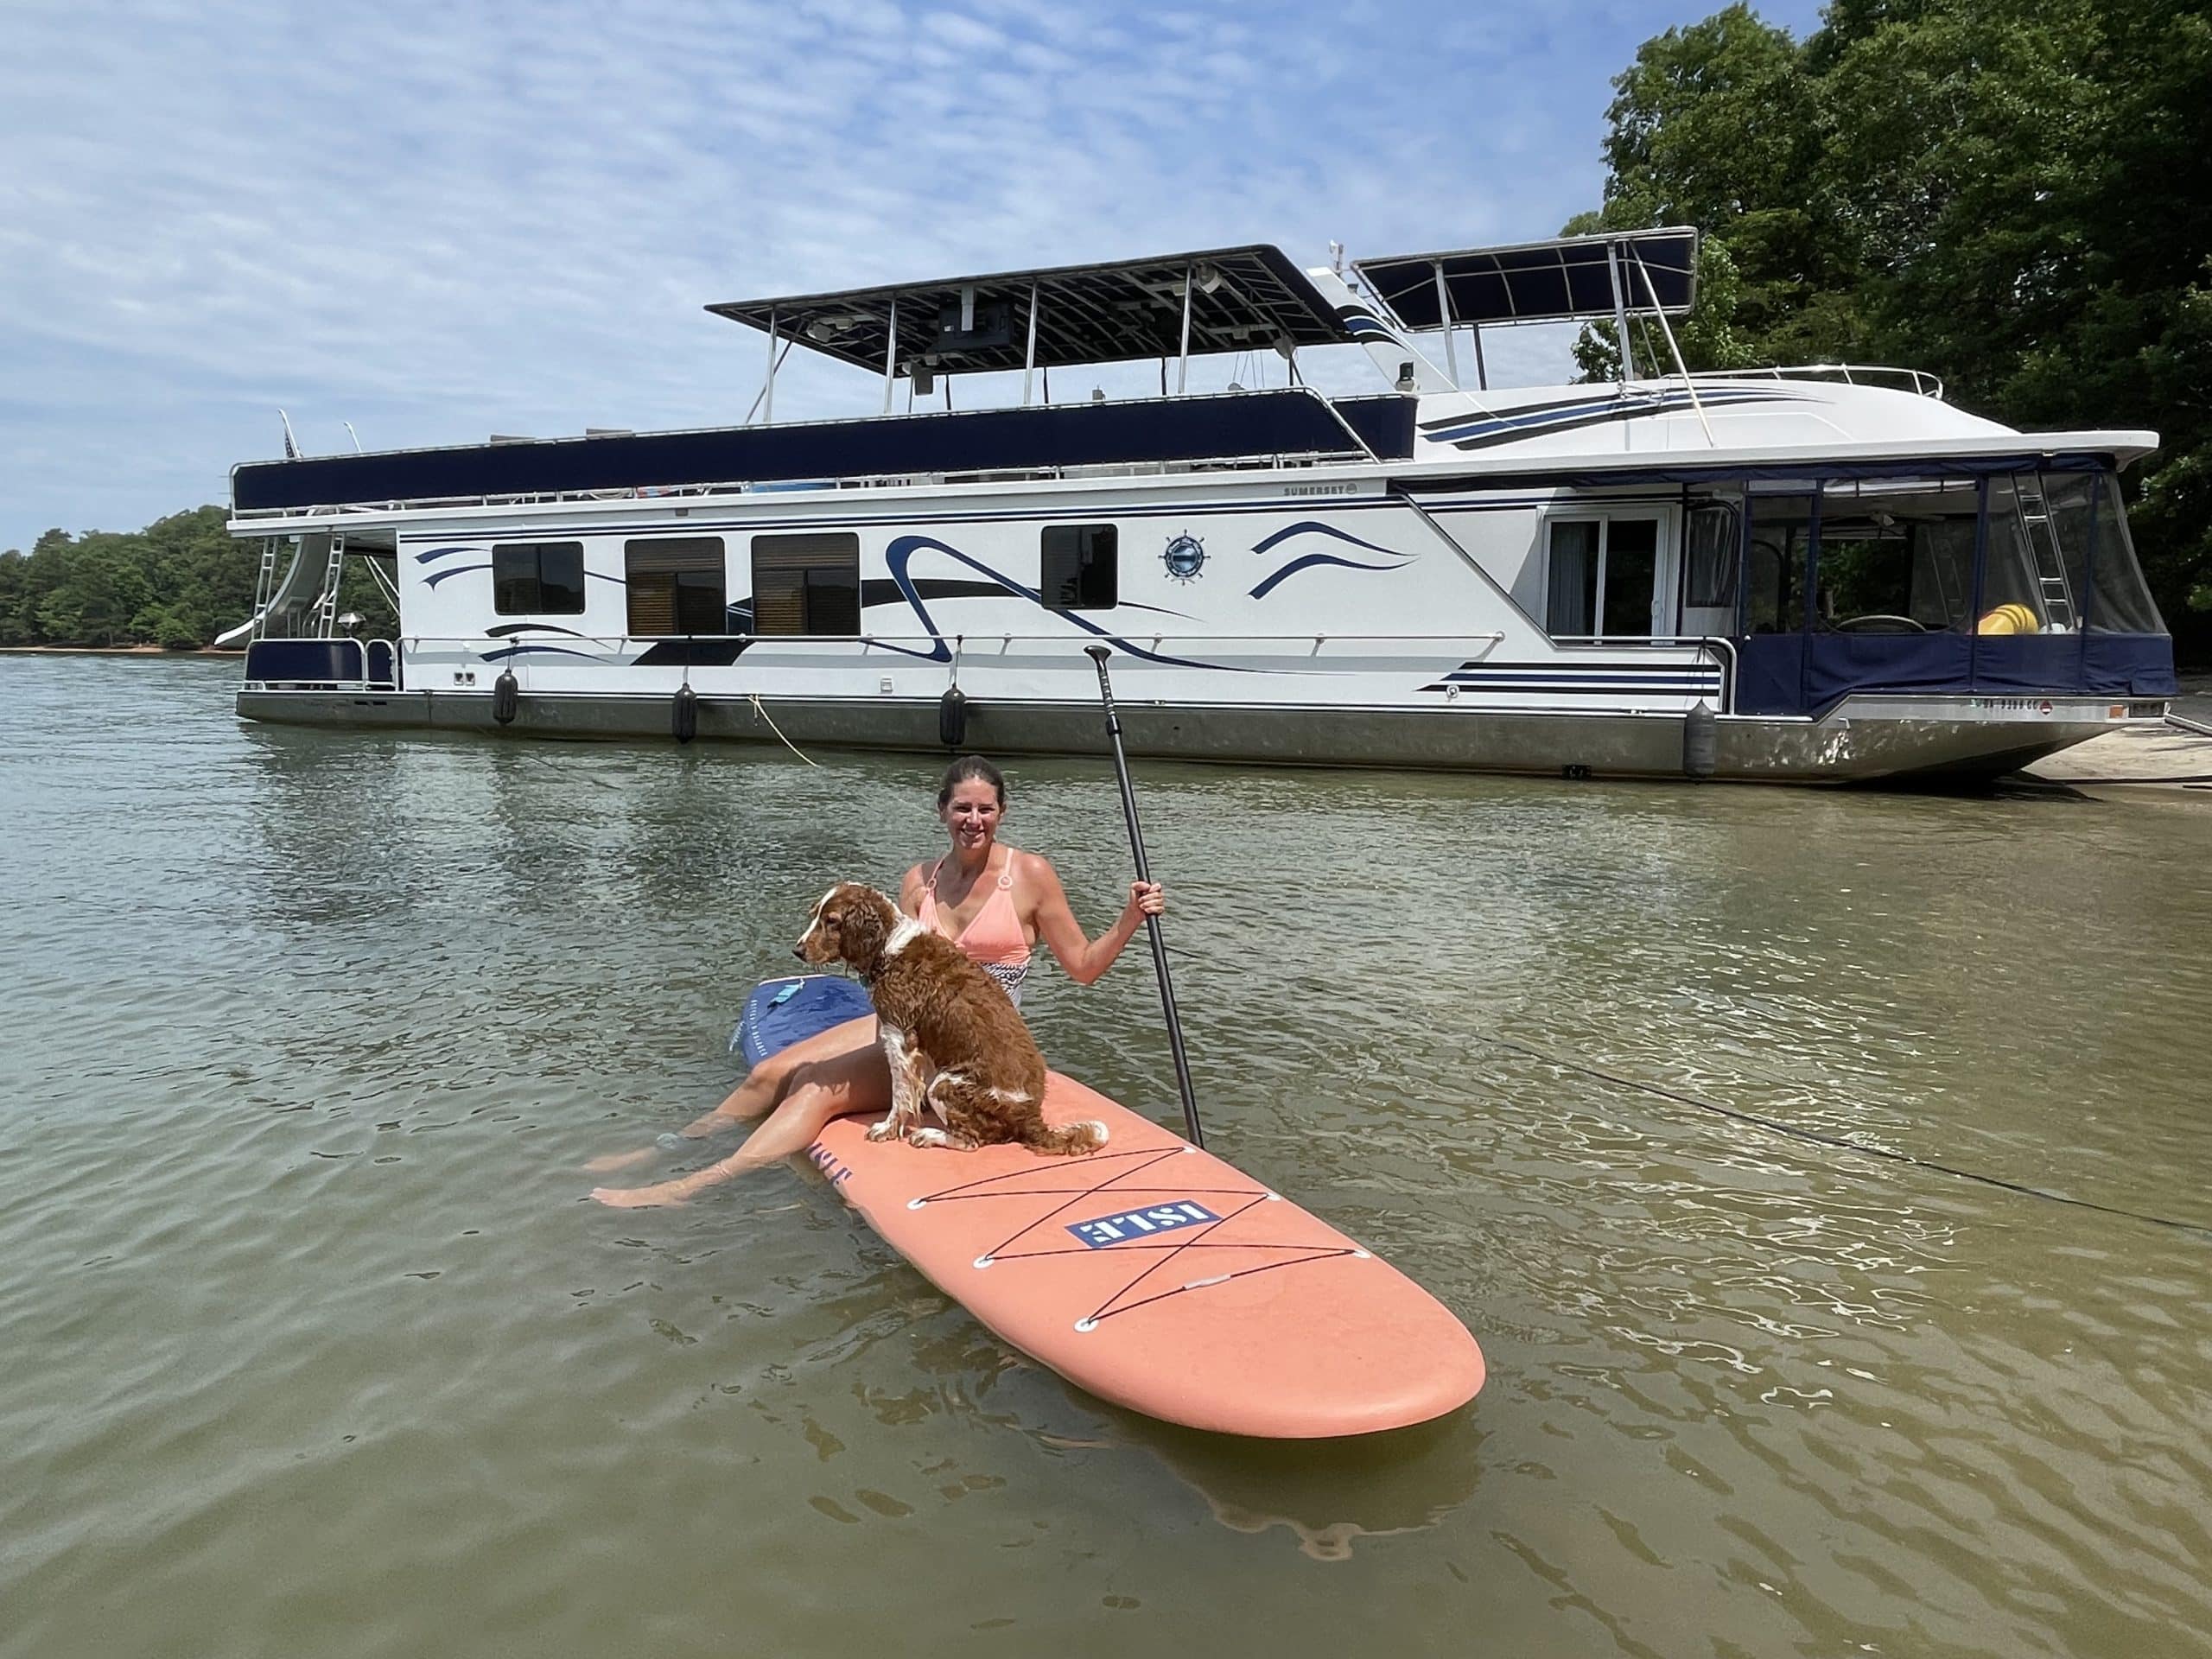 Jessie and Dory on a paddleboard next to their houseboat